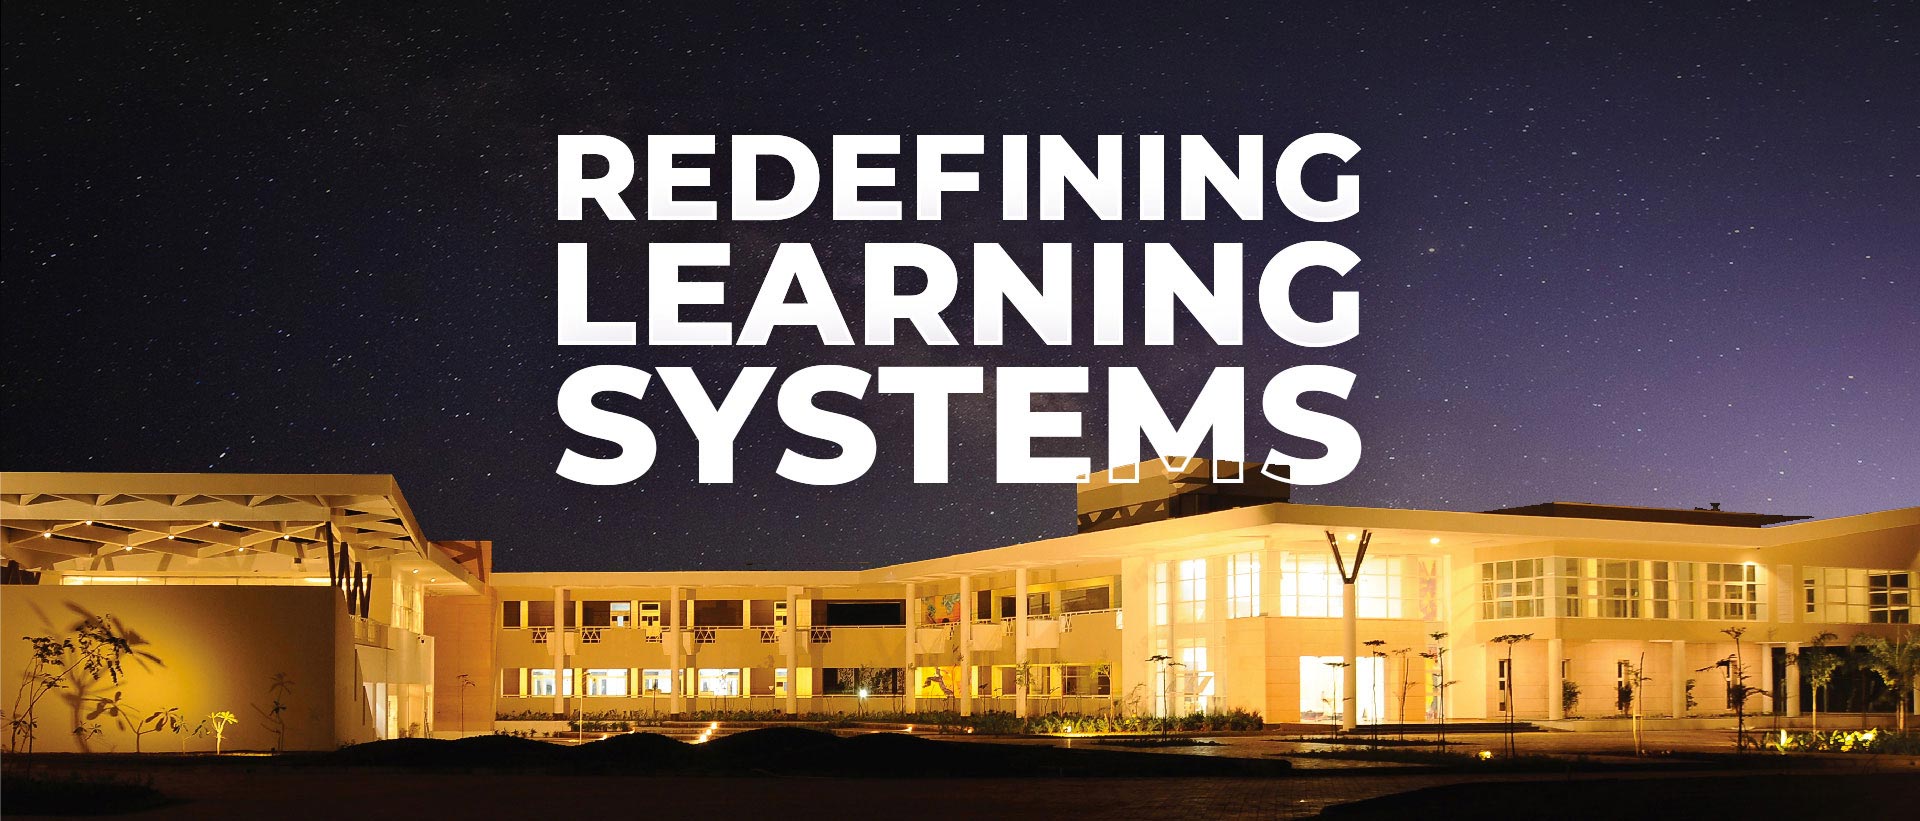 Redefining Learning Systems